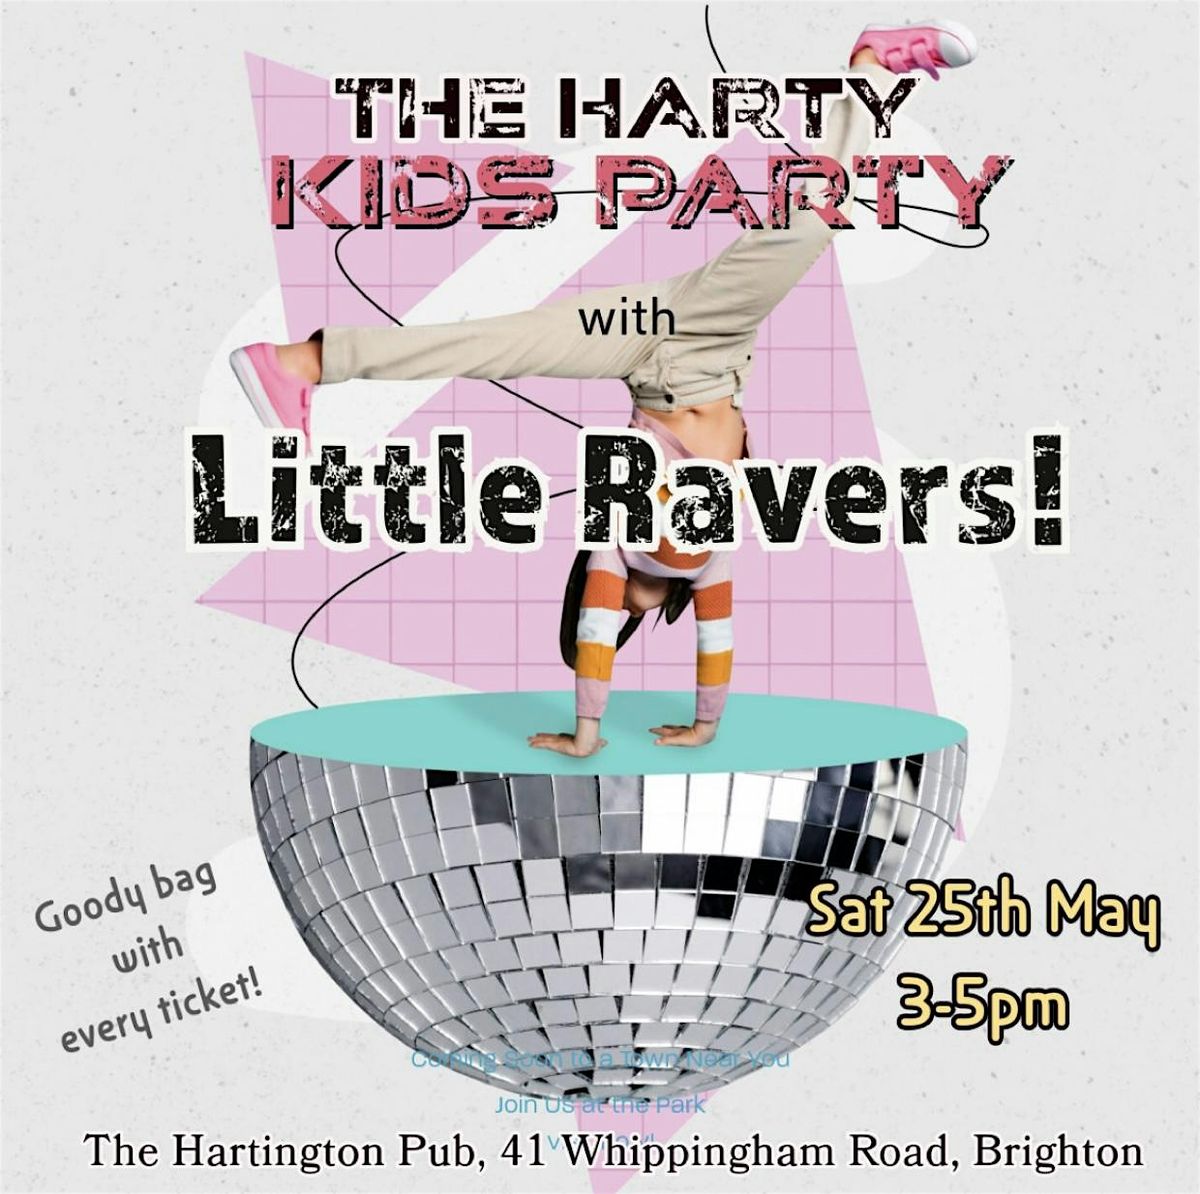 The Harty Kids Party with Little Ravers